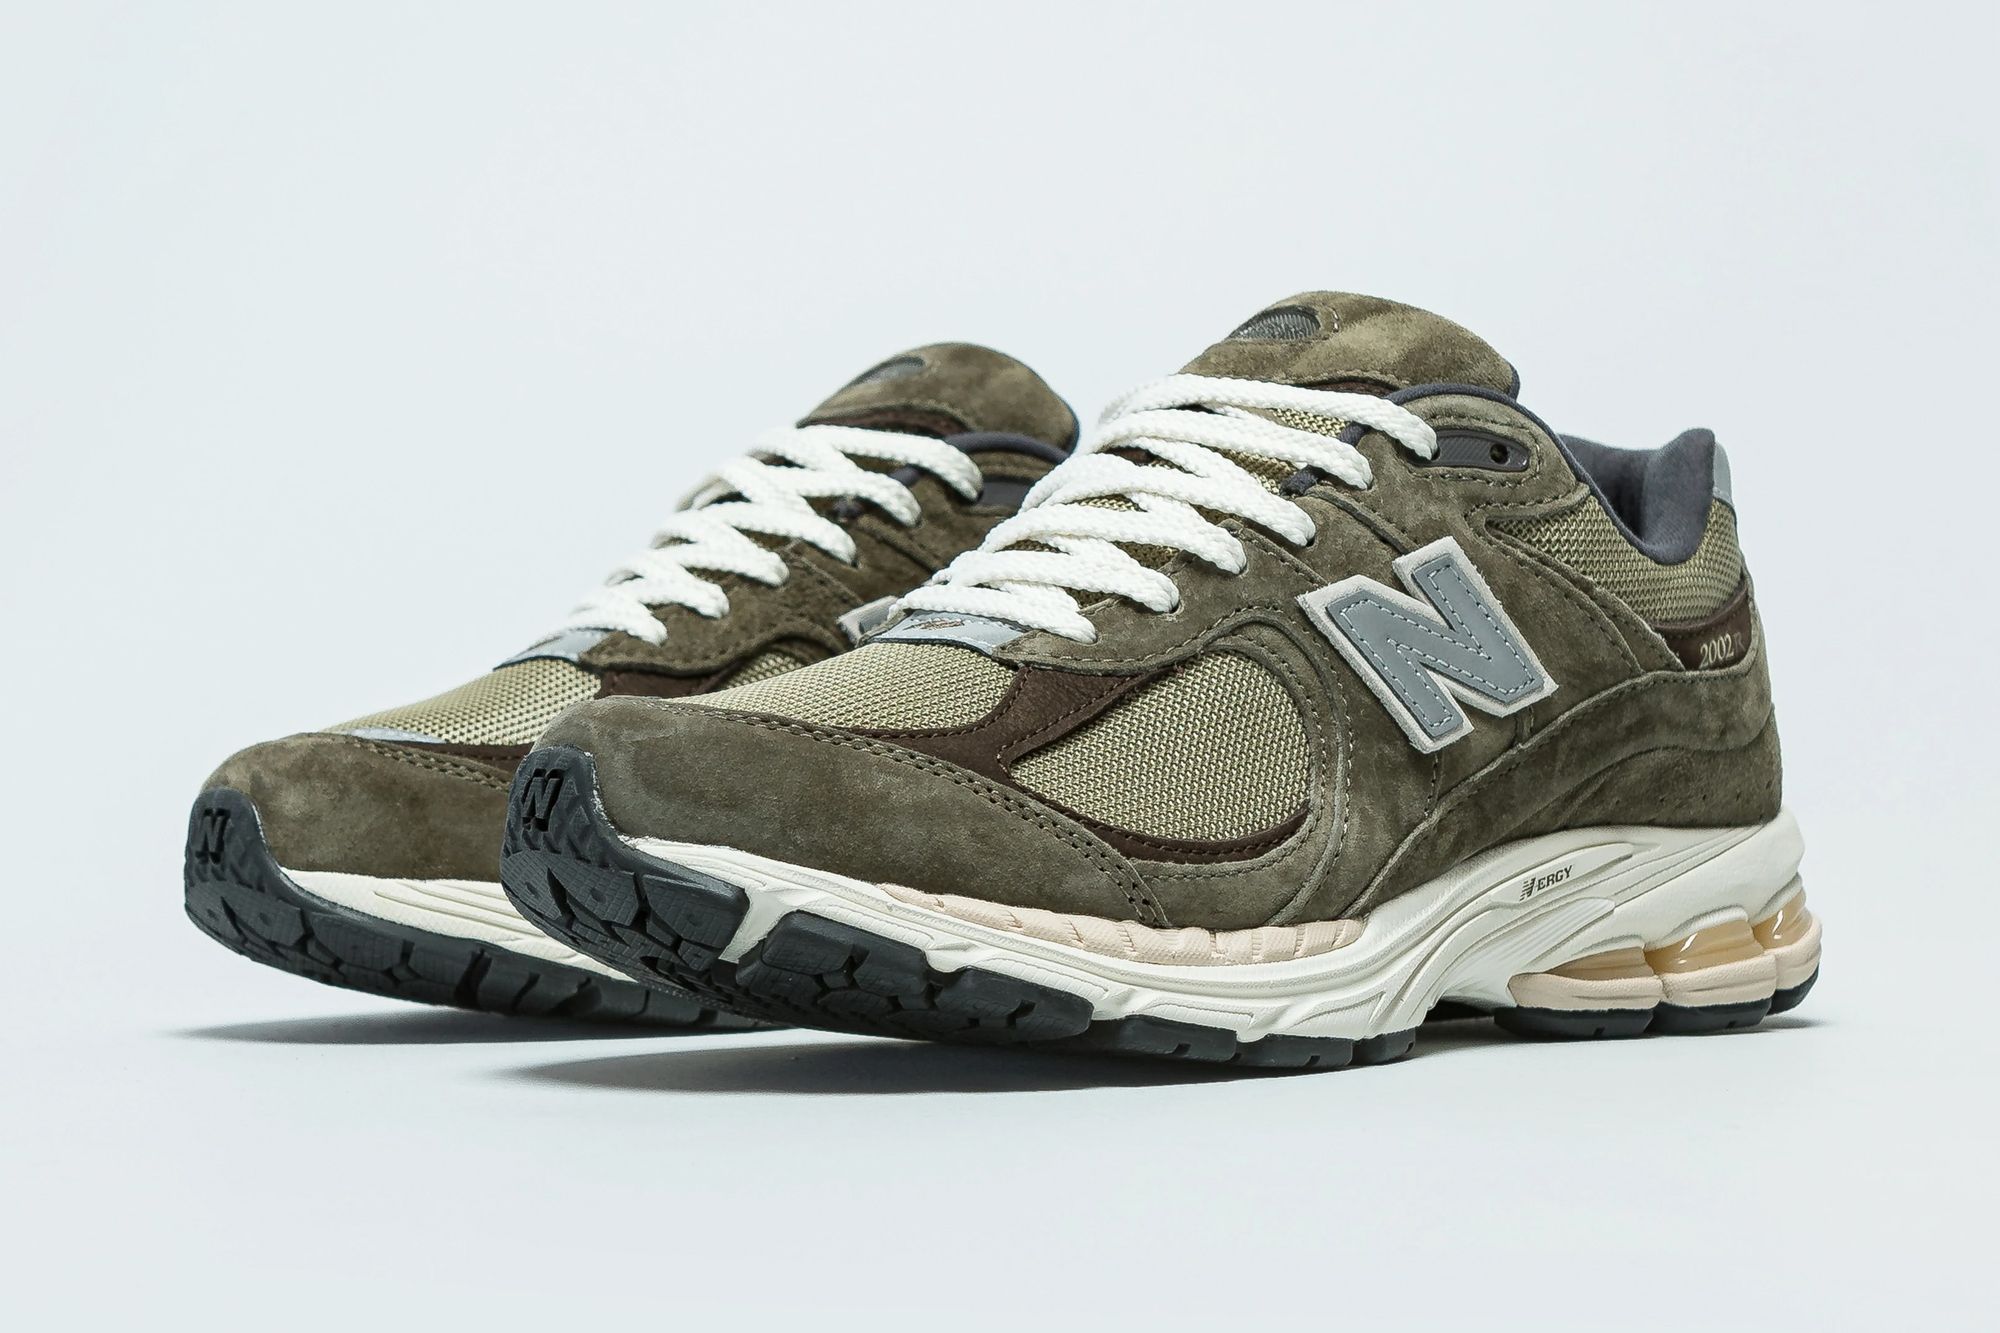 New Balance 2002R Olive Suede